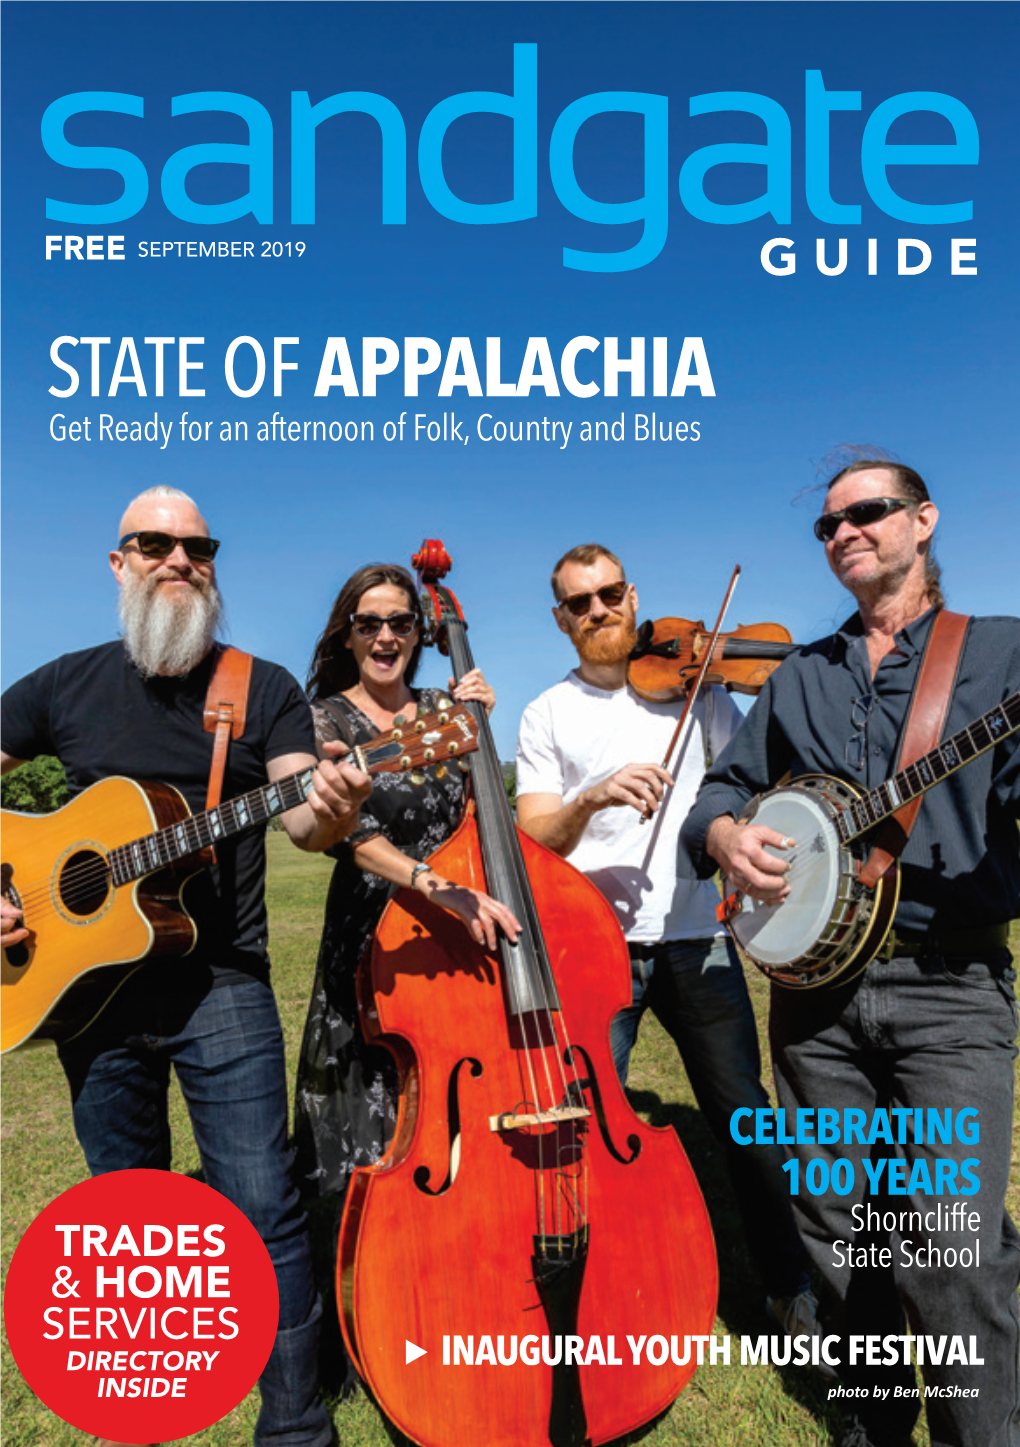 STATE of APPALACHIA Get Ready for an Afternoon of Folk, Country and Blues